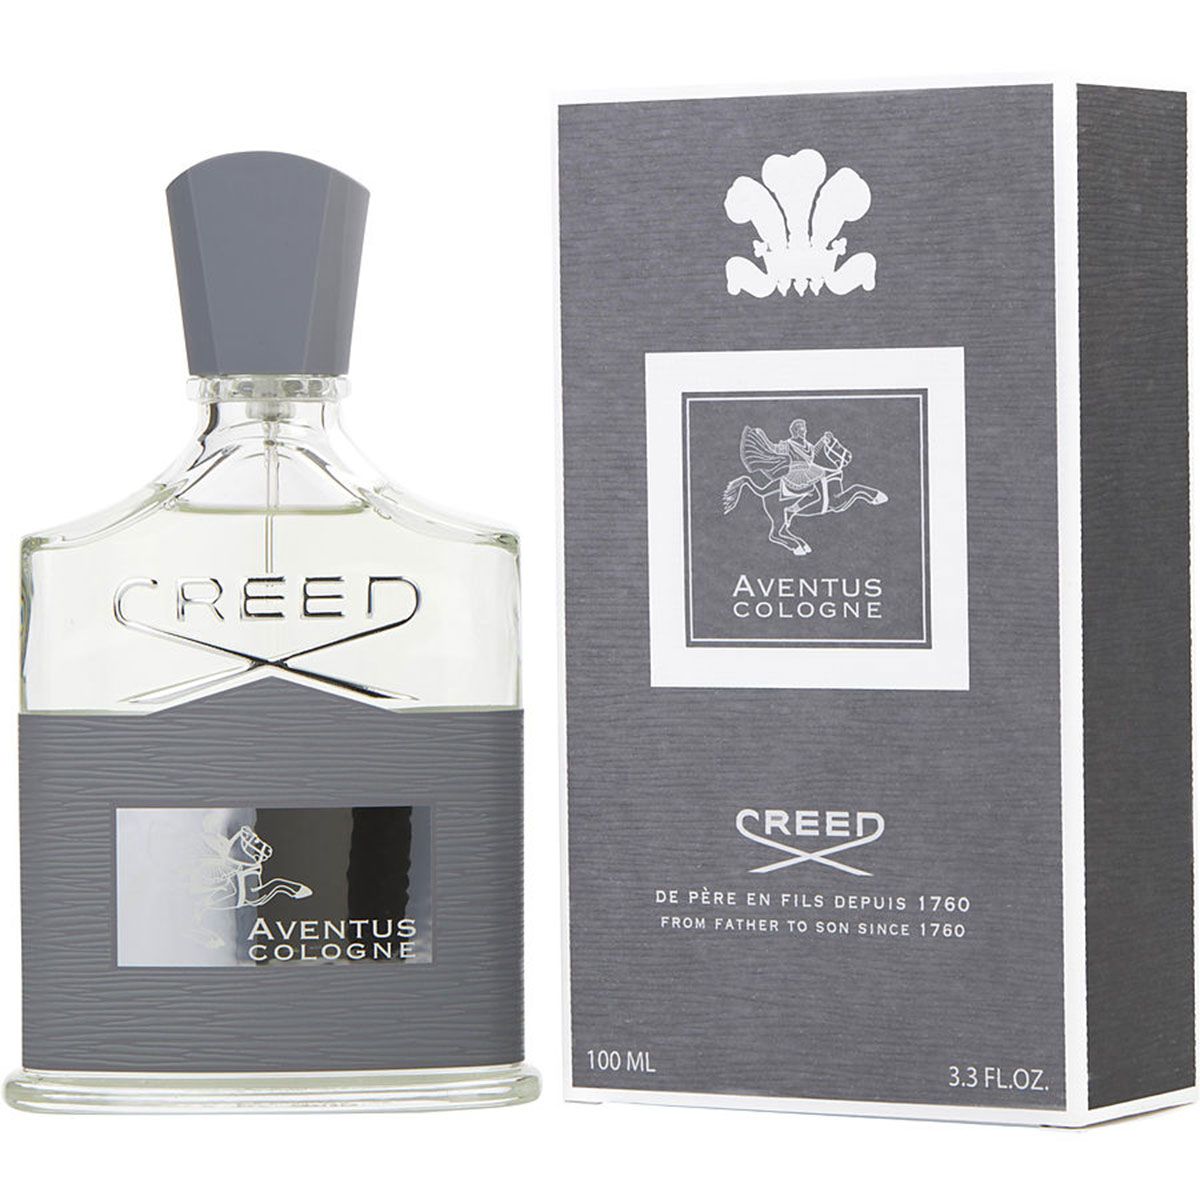  Creed Aventus Cologne 